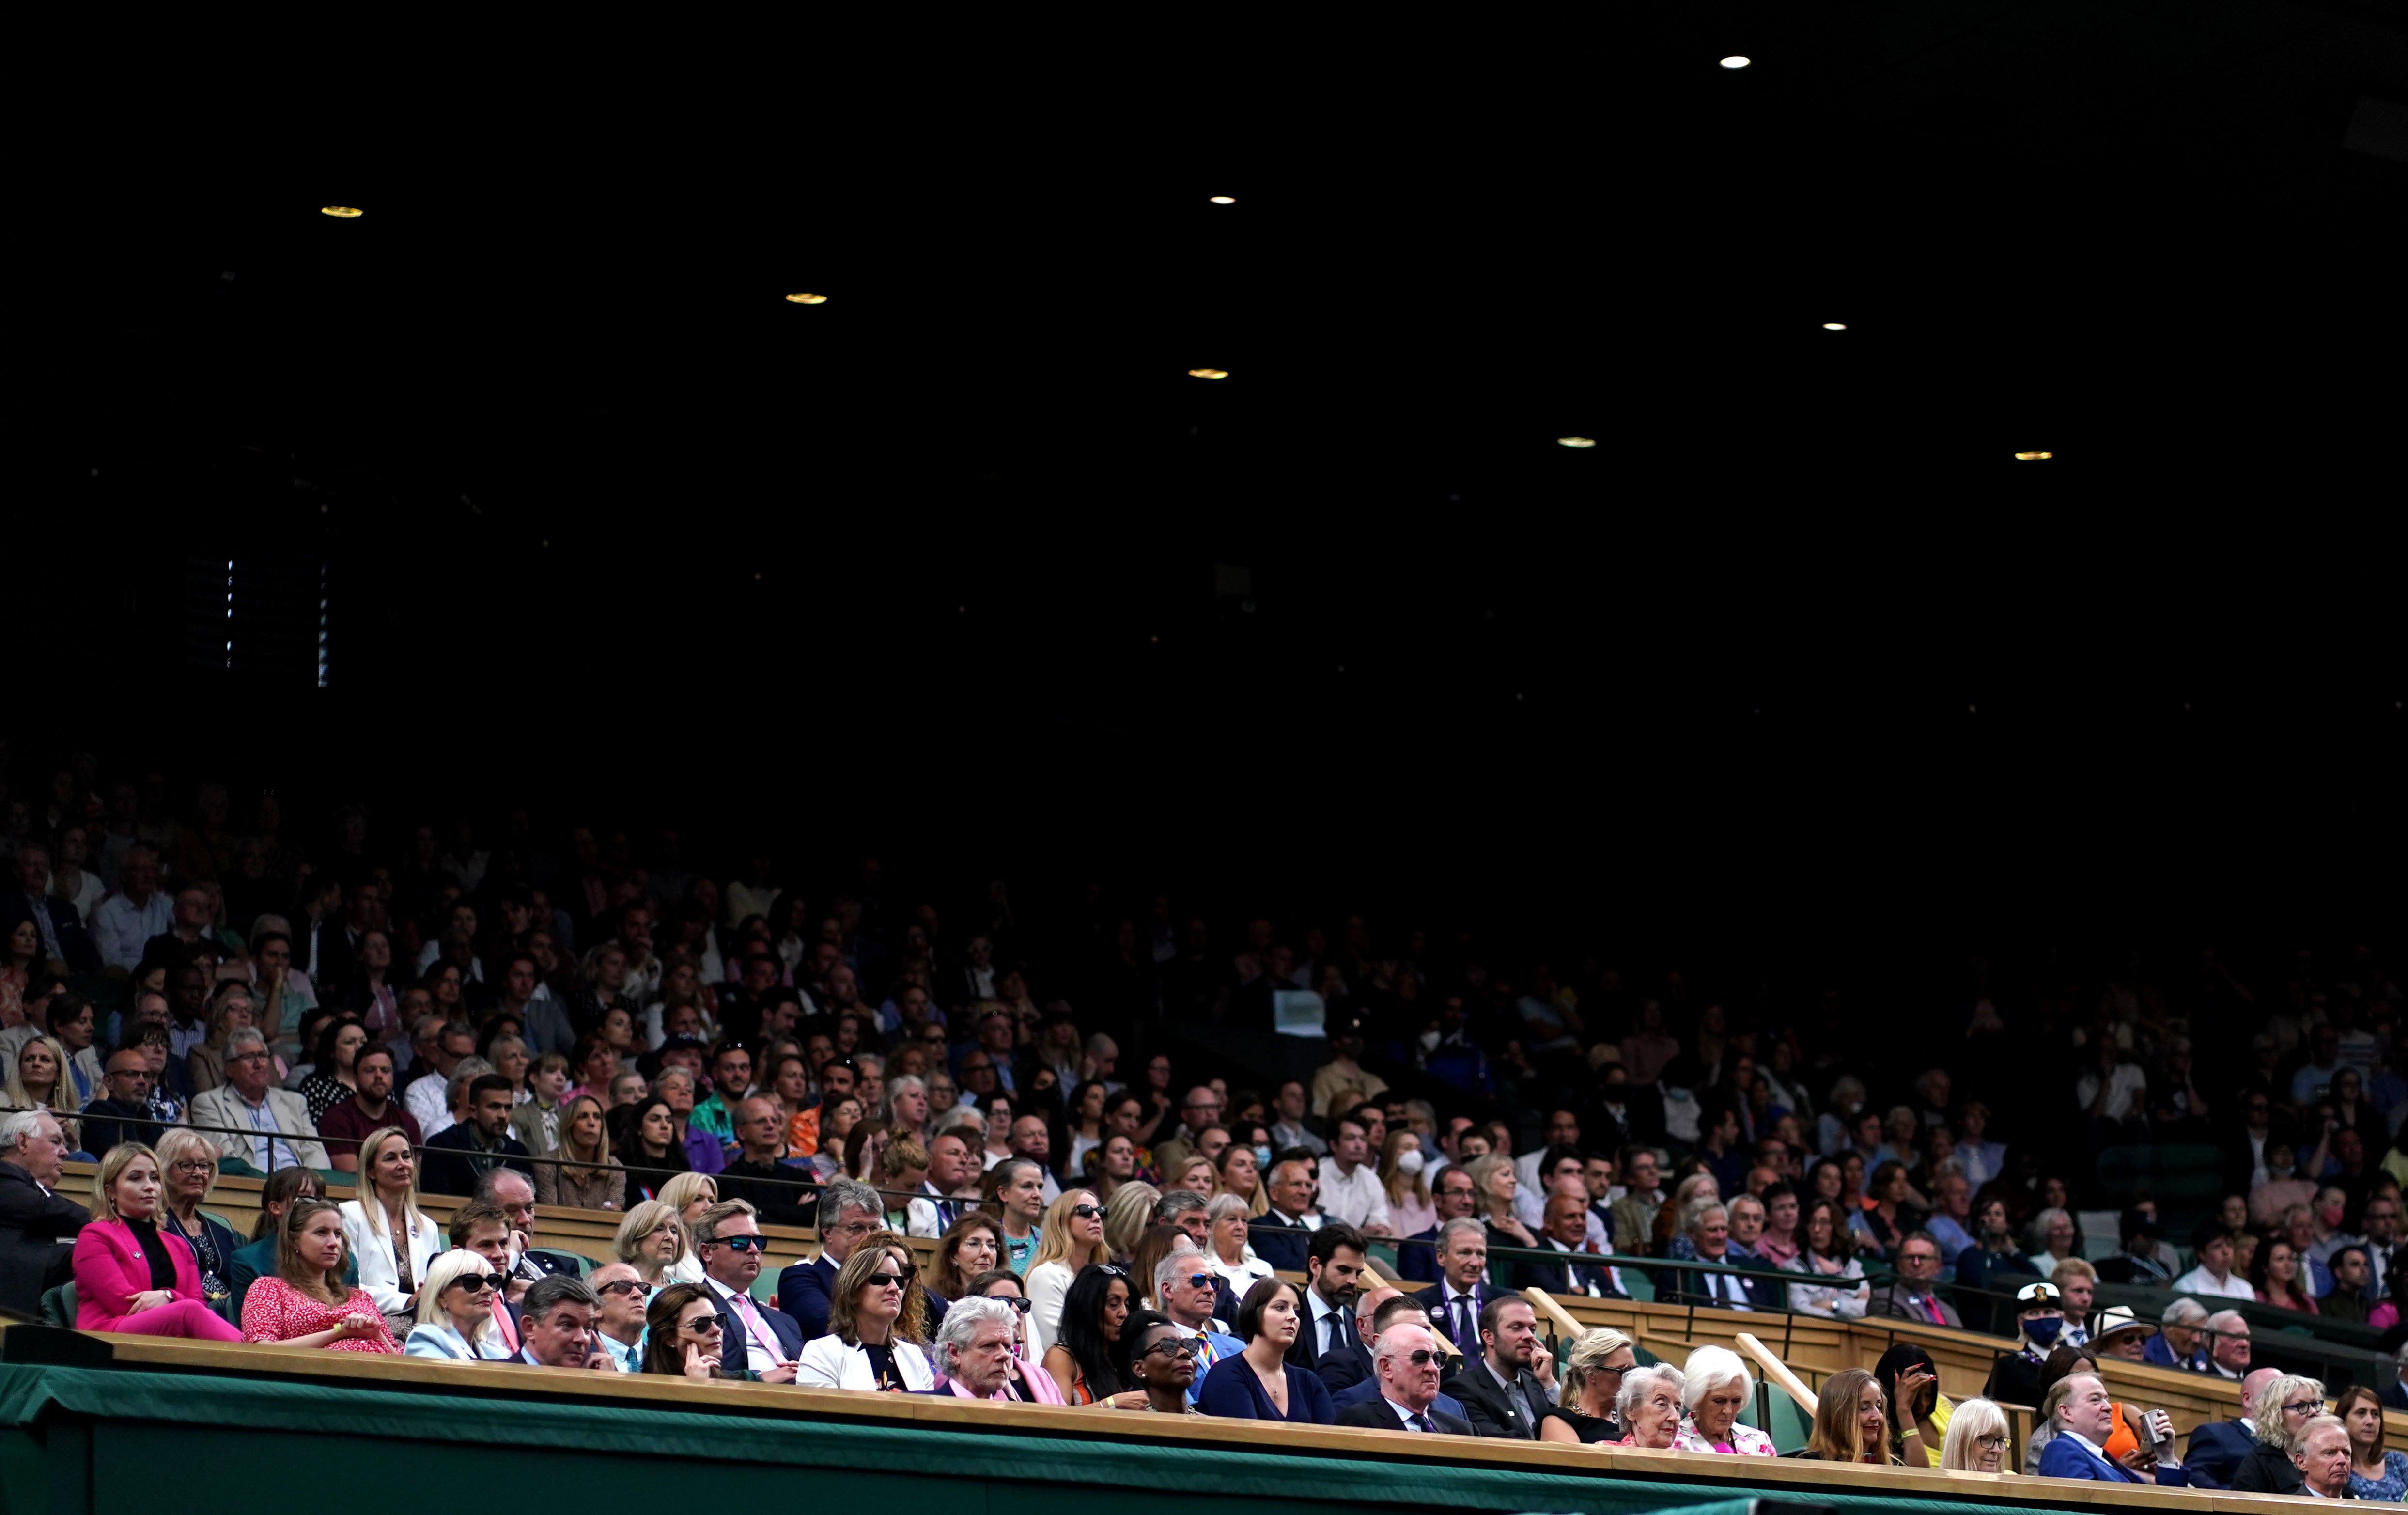 It was busy in the royal box during the Ladies’ singles match between Aryna Sabalenka and Ons Jabeuron